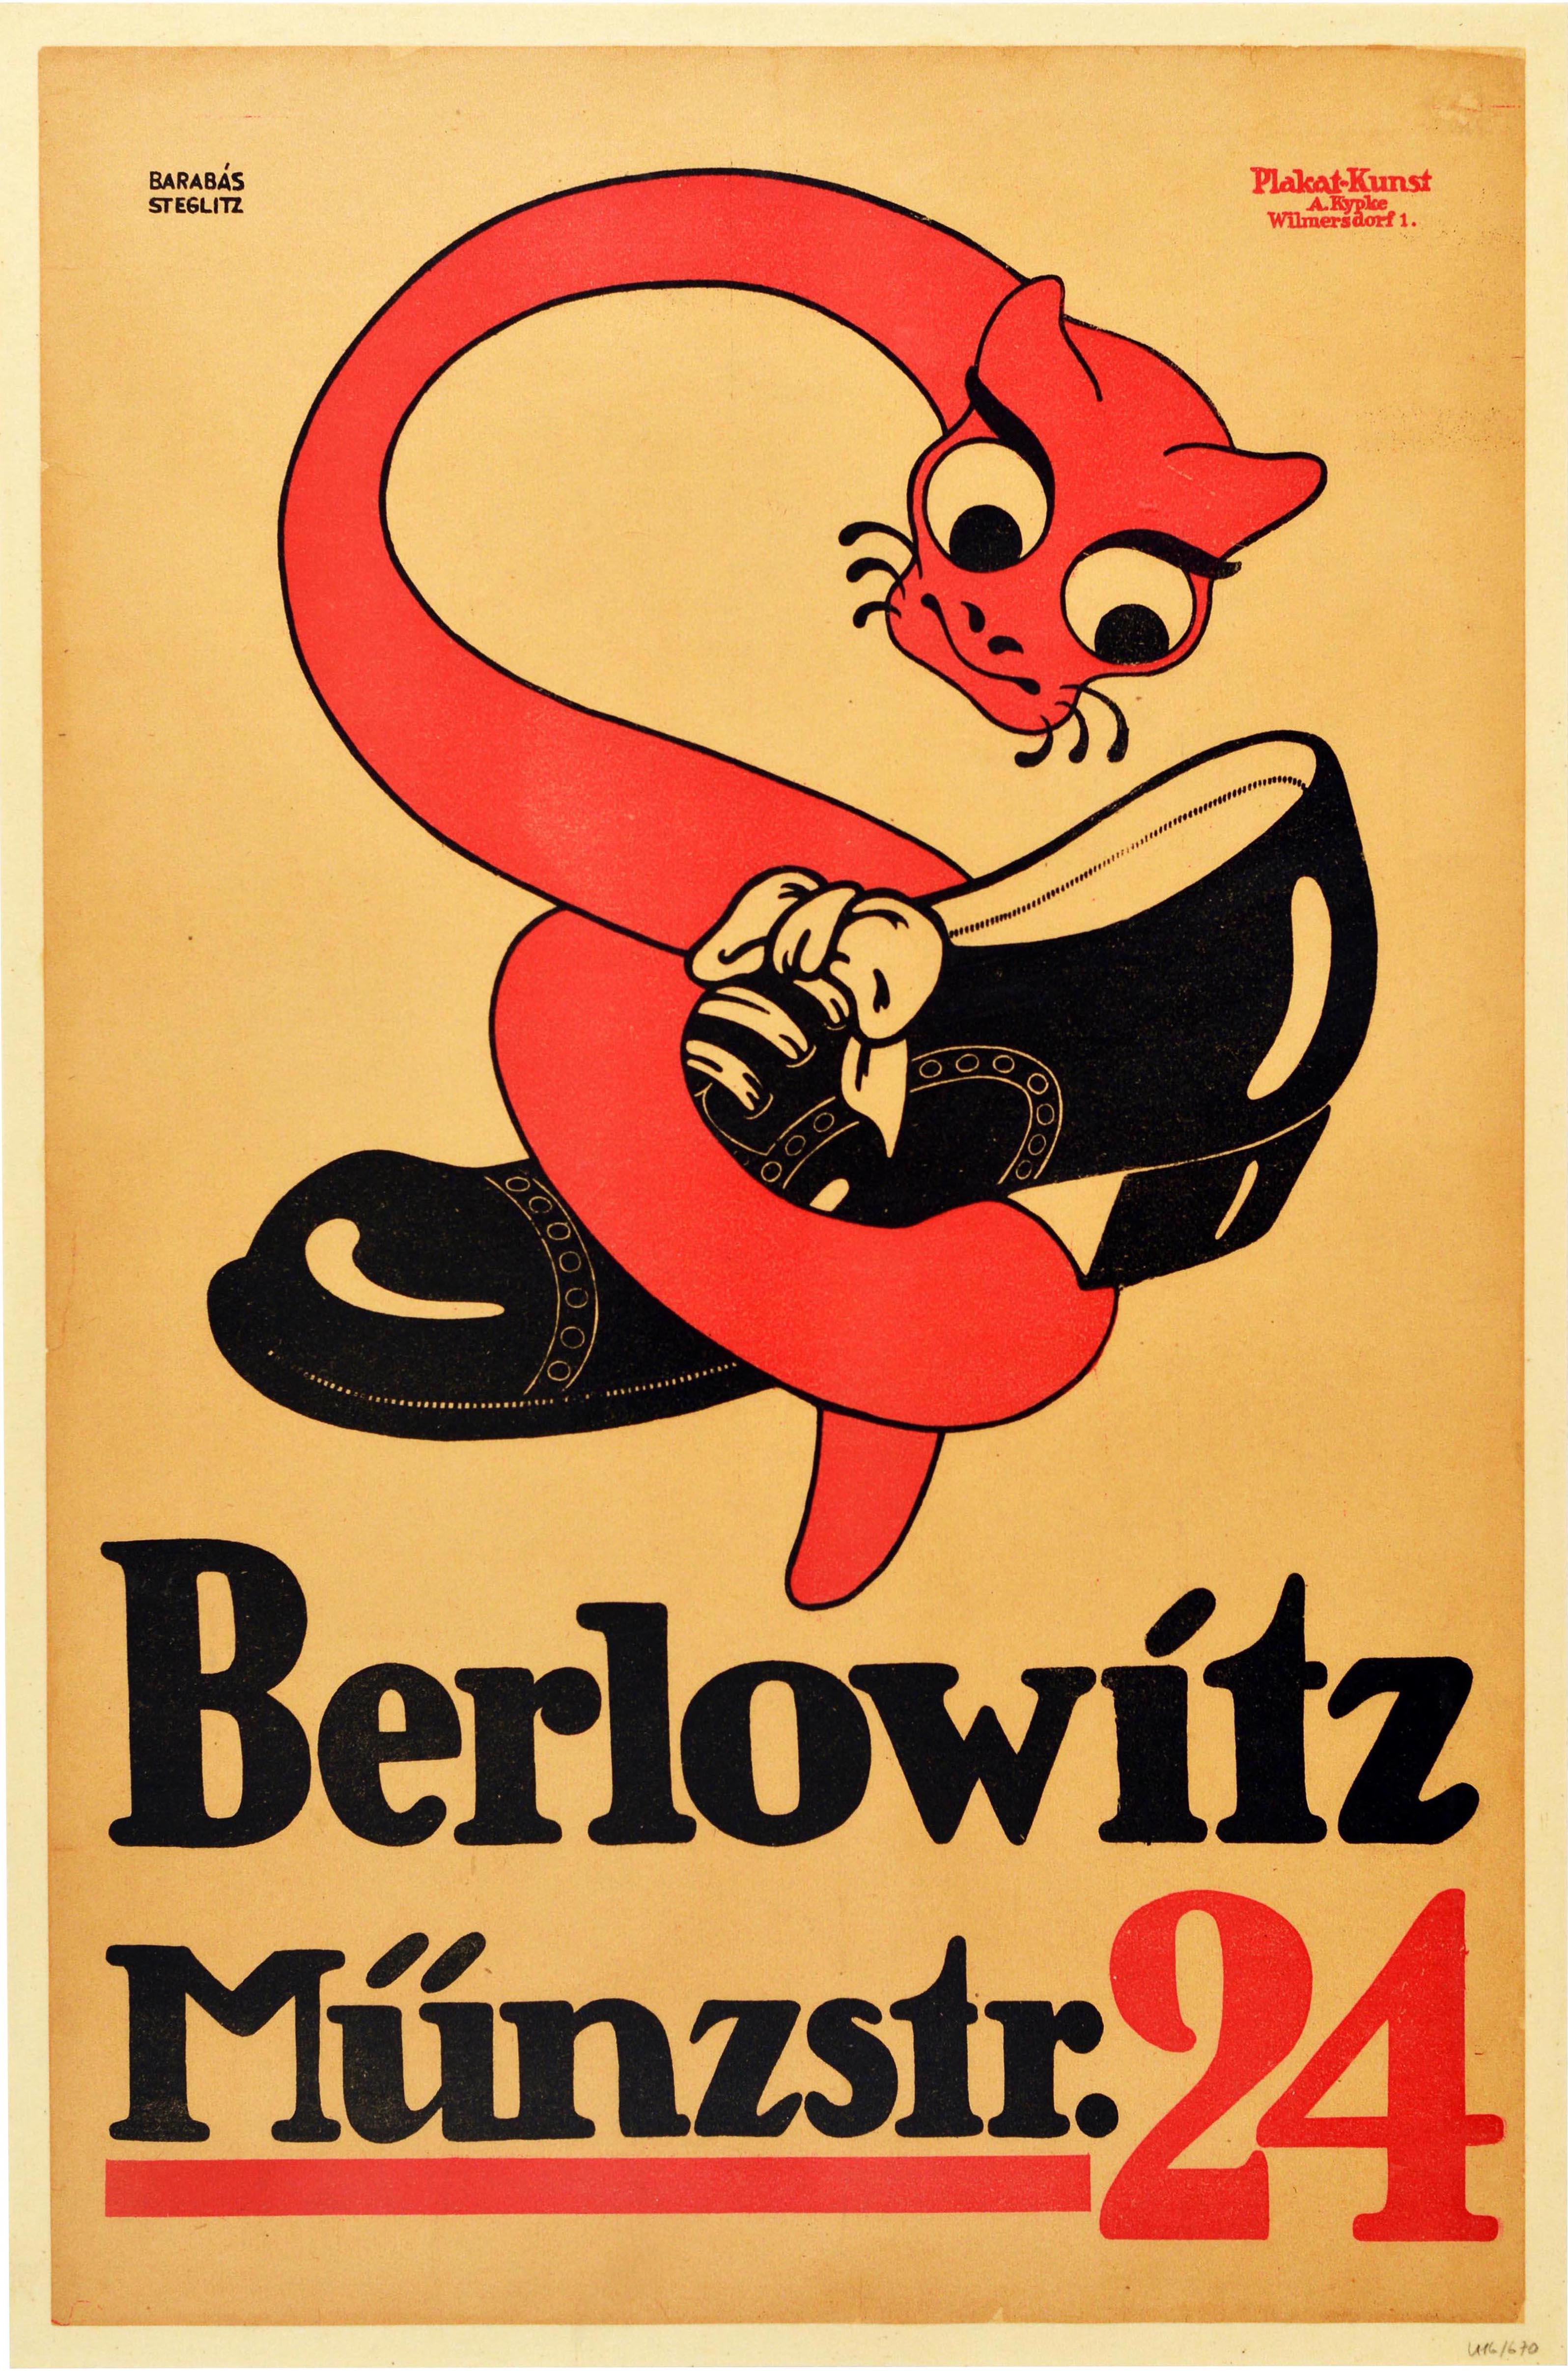 Original antique advertising poster for the Berlowitz shoemaker at 24 Munzstrasse Berlin featuring a great design depicting a cartoon style image of a red snake like creature with big eyes coiled around a shiny black shoe tied with white ribbon